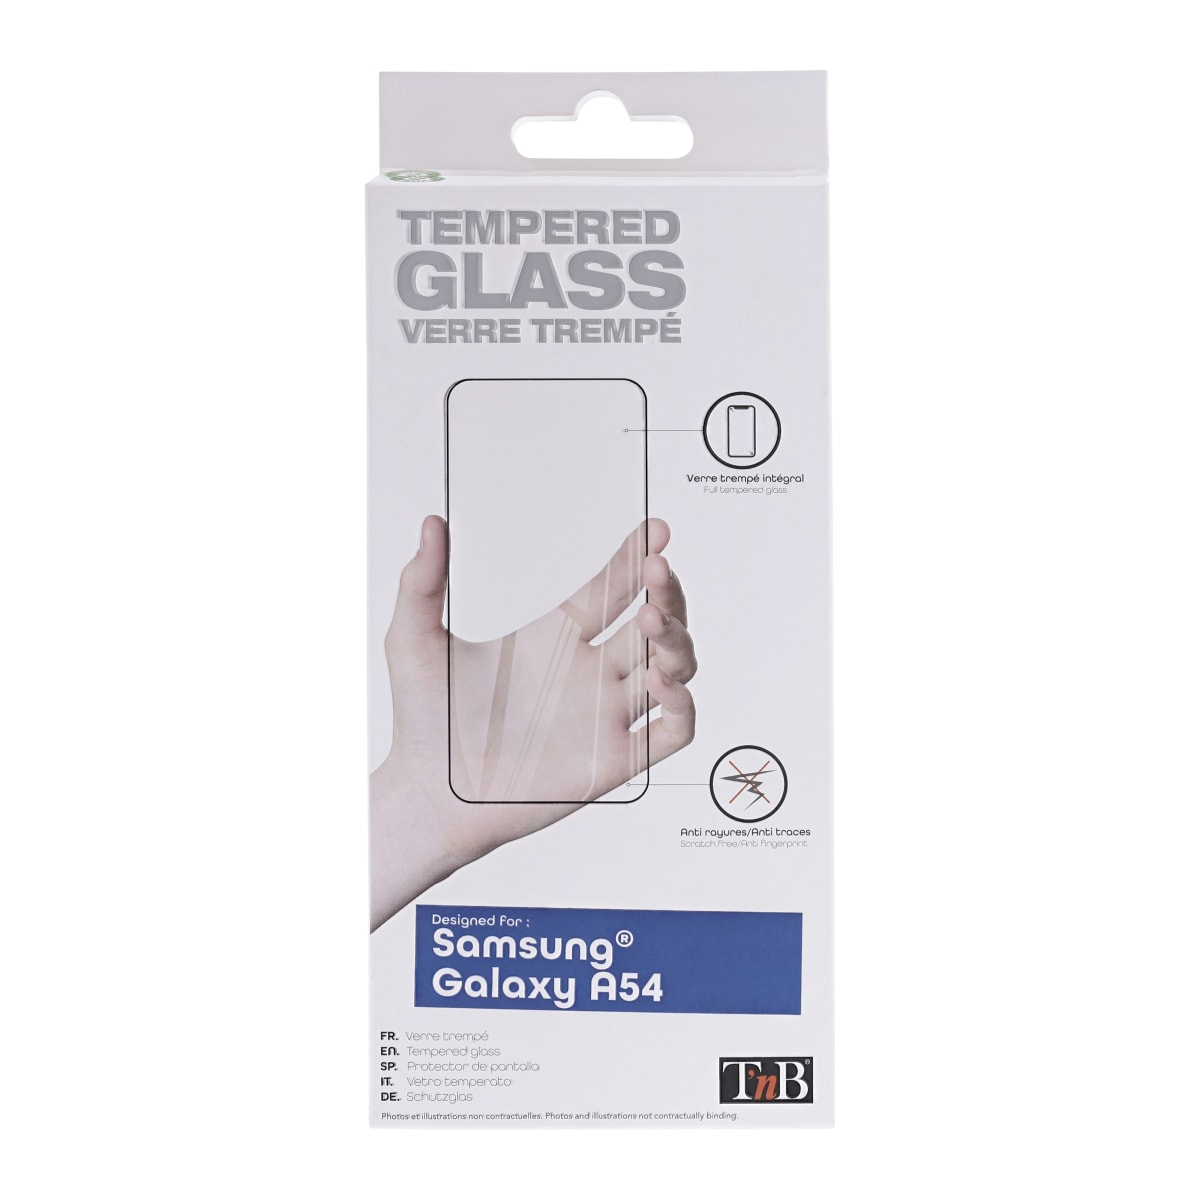 Tempered glass protection for Samsung Galaxy A54